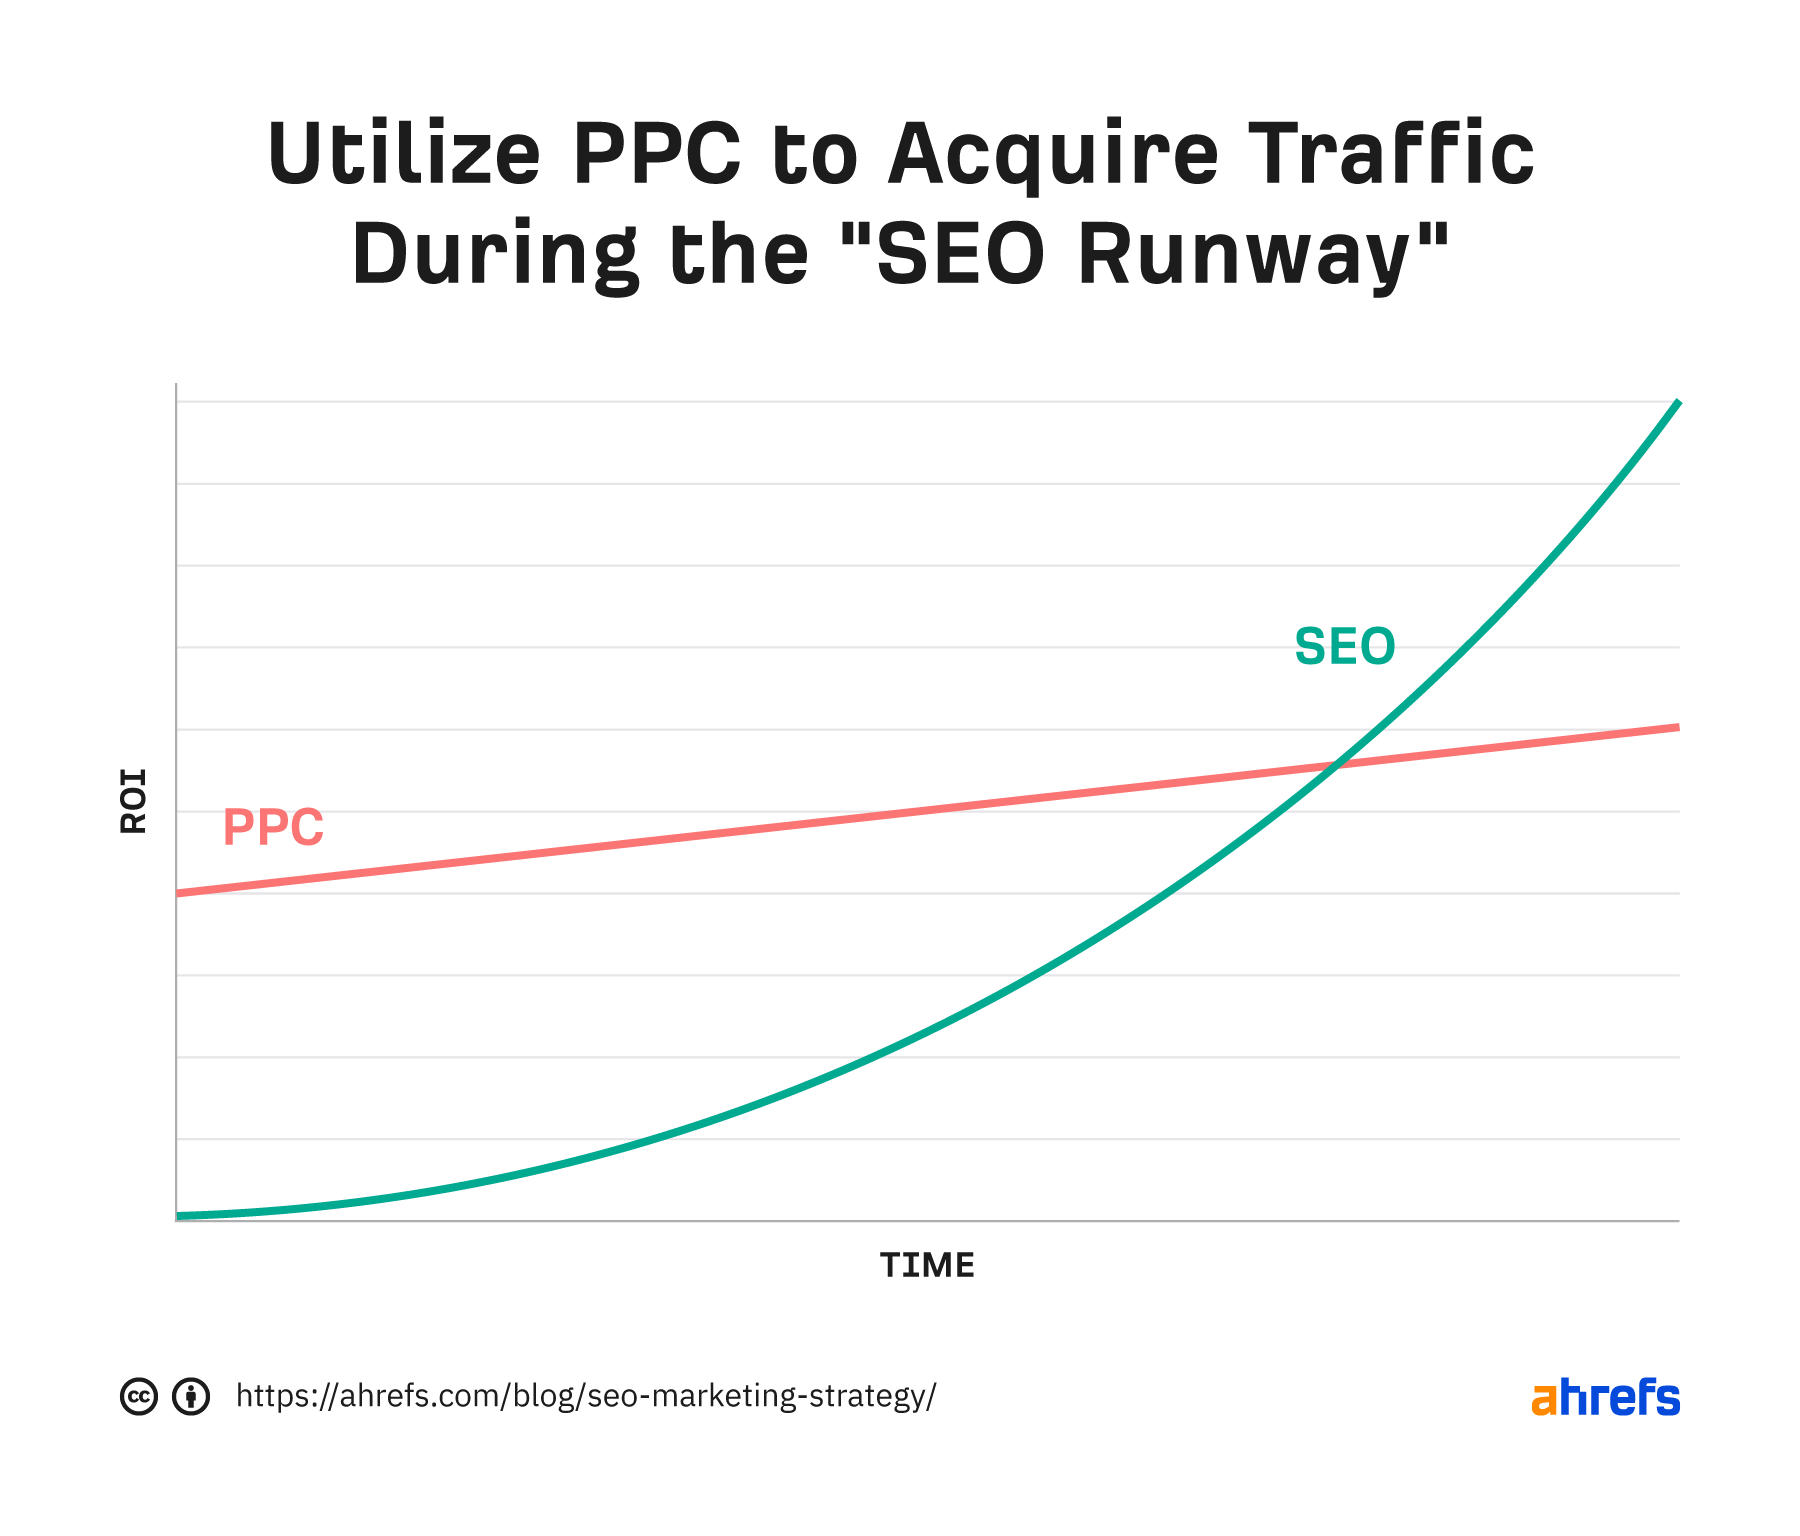 Acquire traffic instantly via PPC during the "SEO runway" period